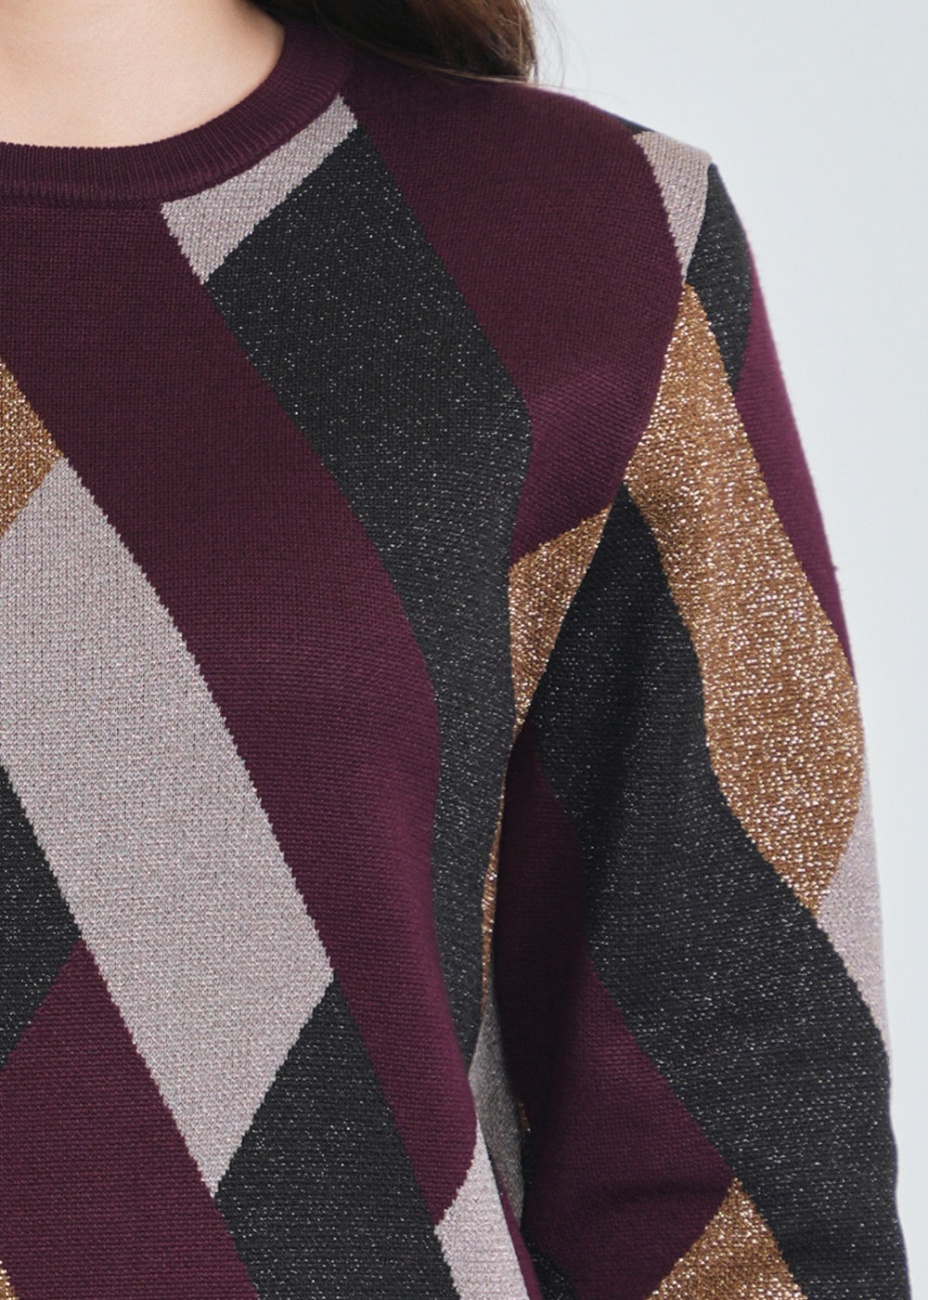 Abstract Geo Designs on Burgundy Knit Top